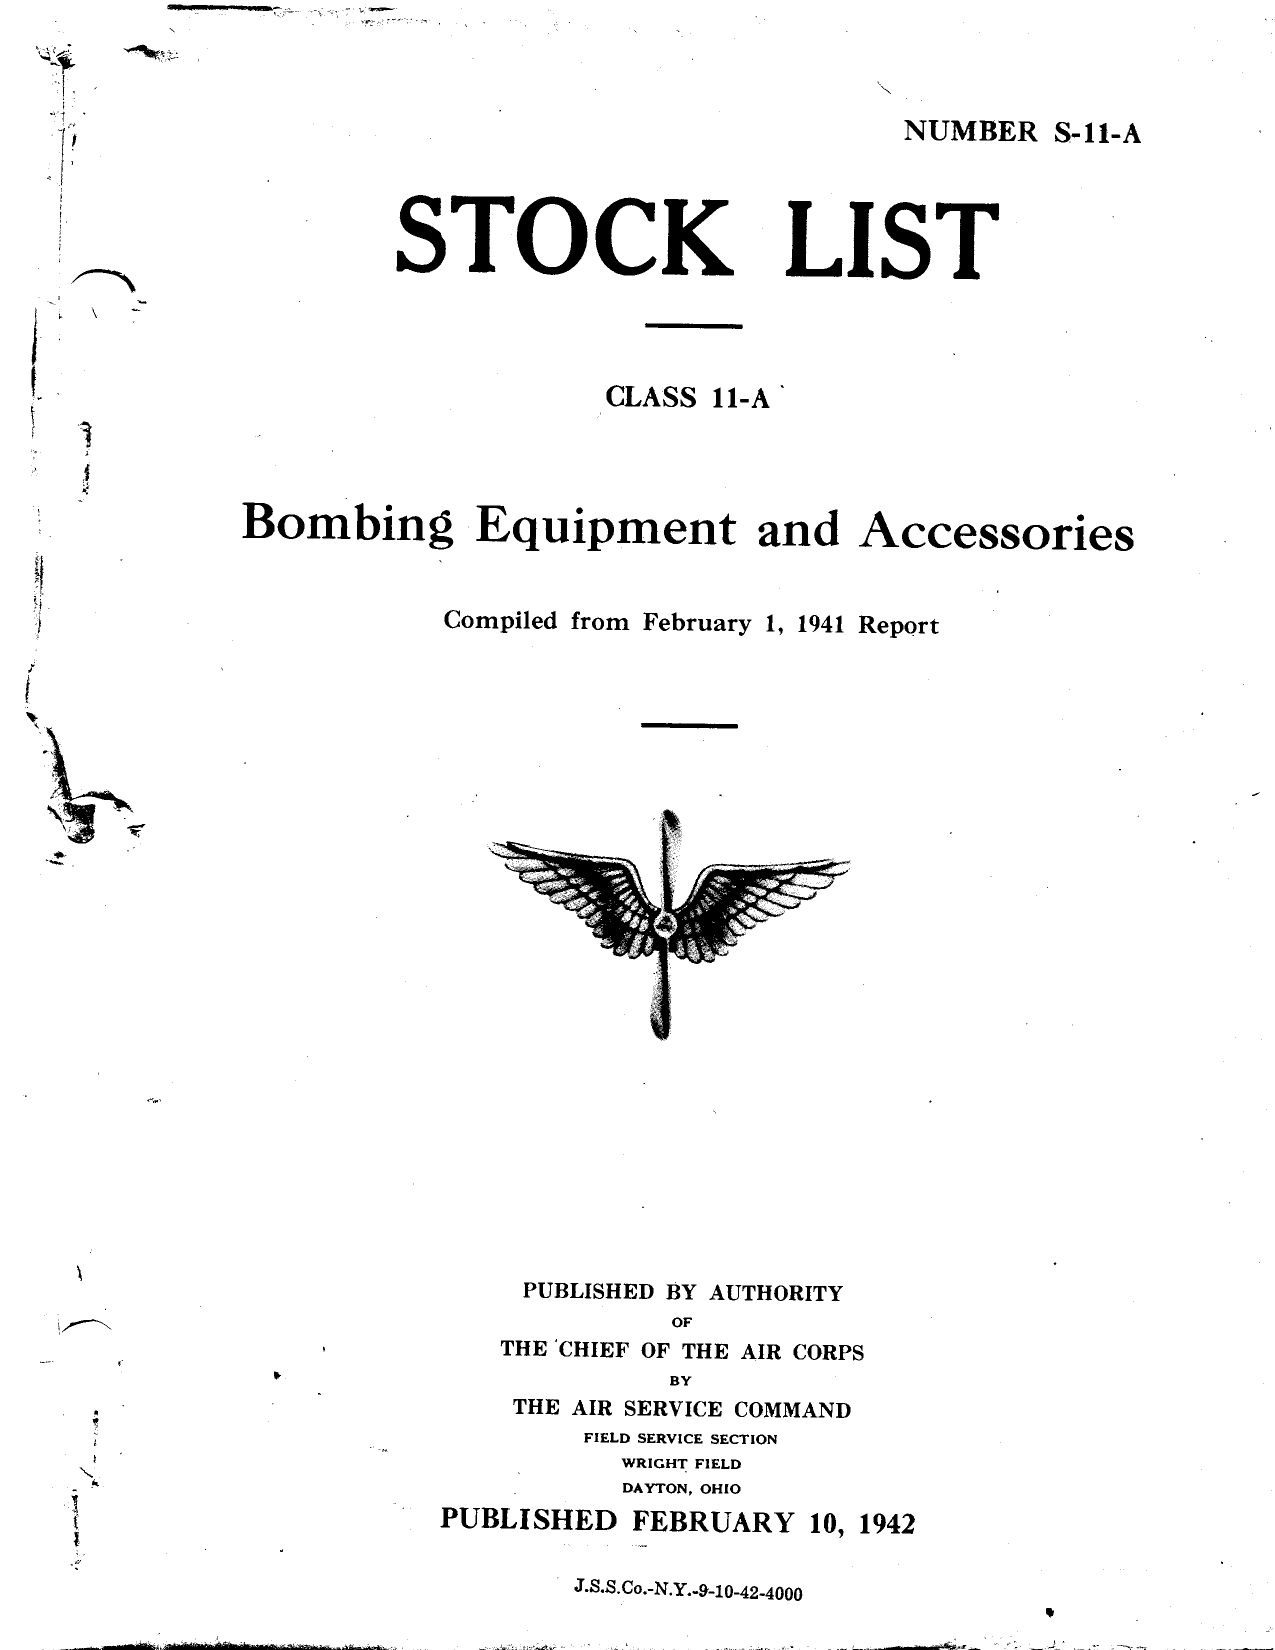 Sample page 1 from AirCorps Library document: Stock List for Bombing Equipment and Accessories